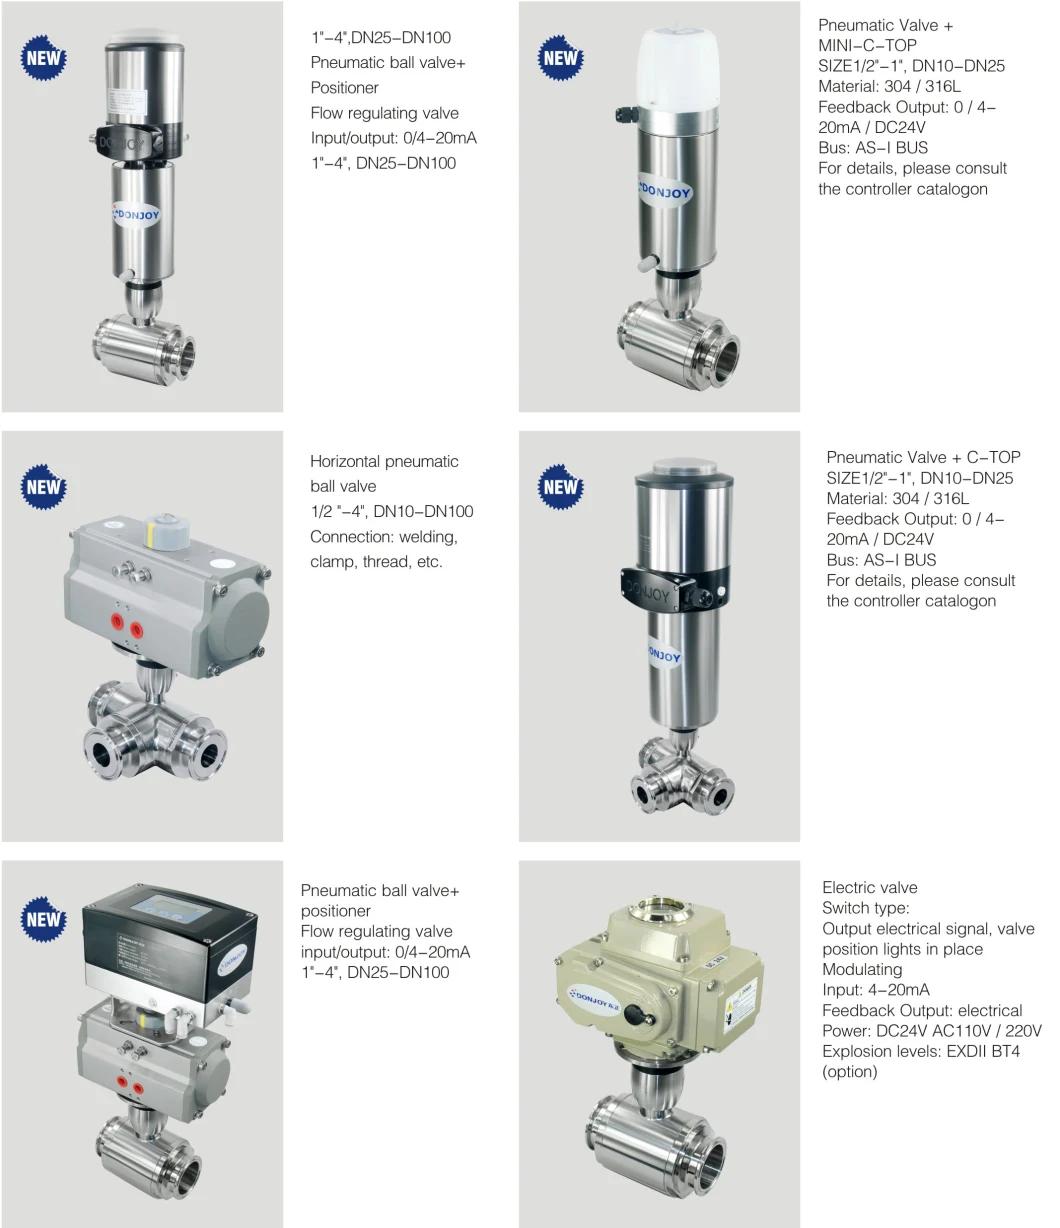 Us 3A Donjoy Sanitary Ball Valve with Intelligent Positioner